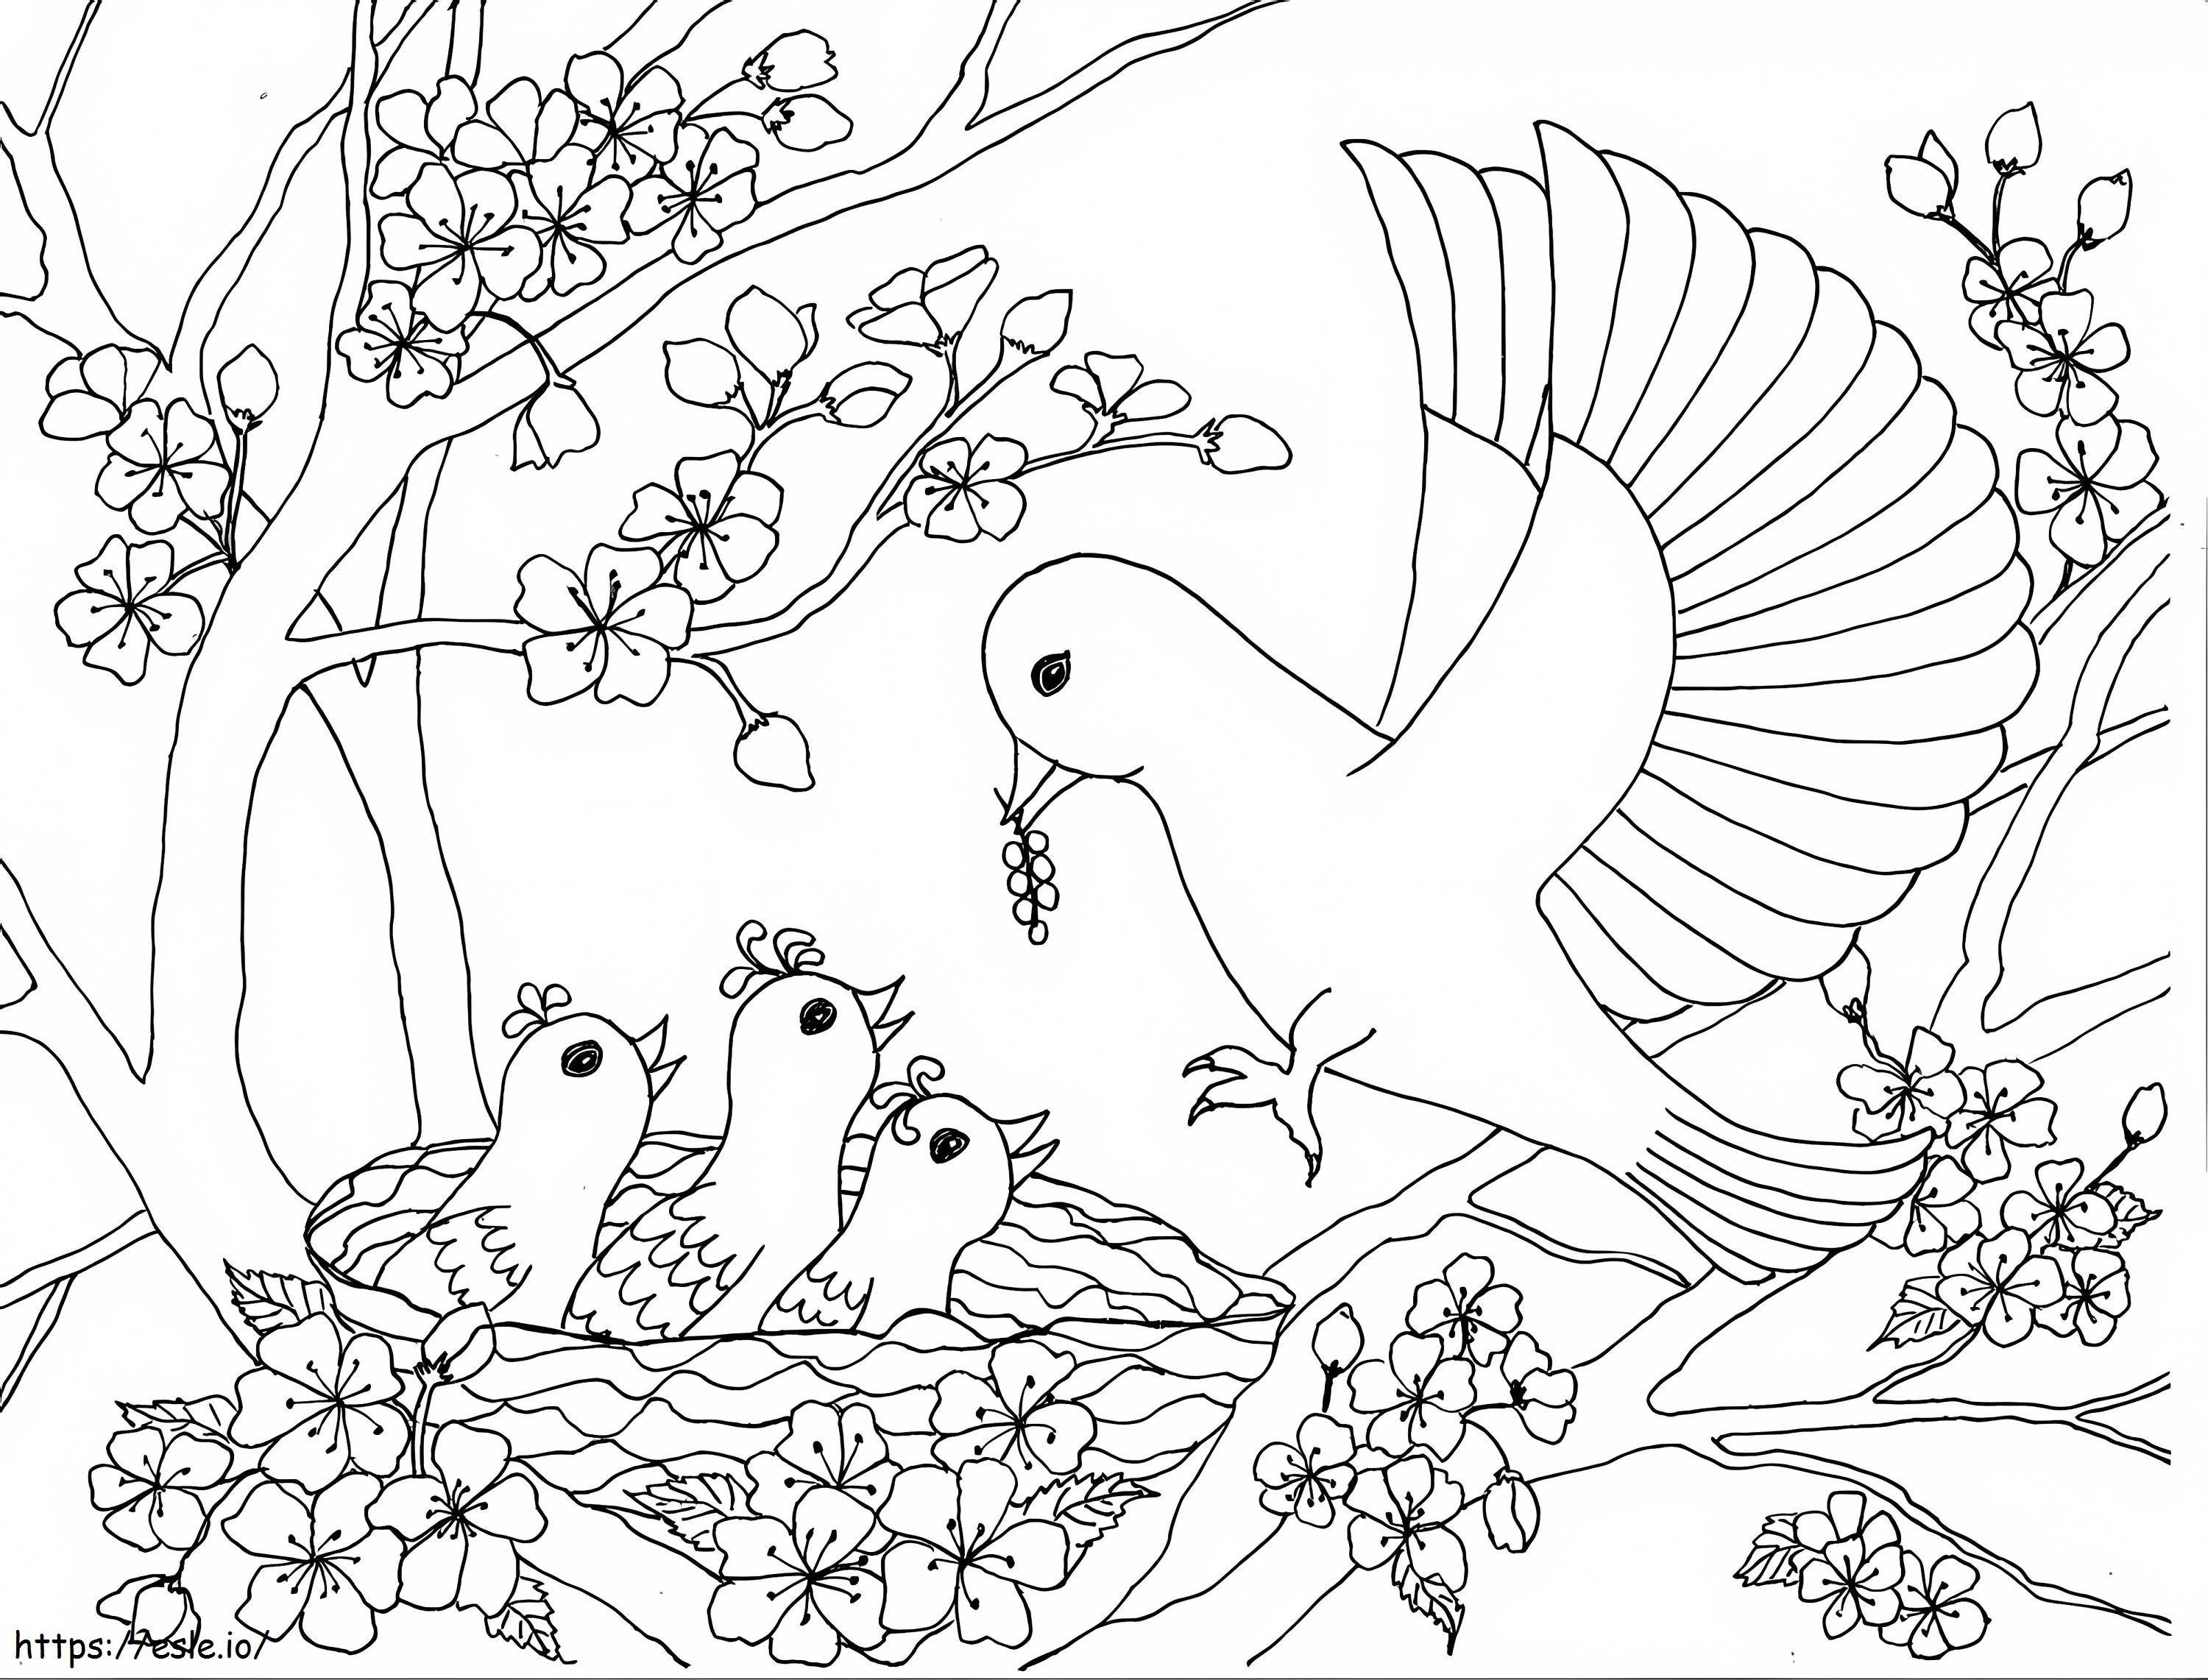 1555917694 Cherry Blossom New 33 Beautiful Of With coloring page